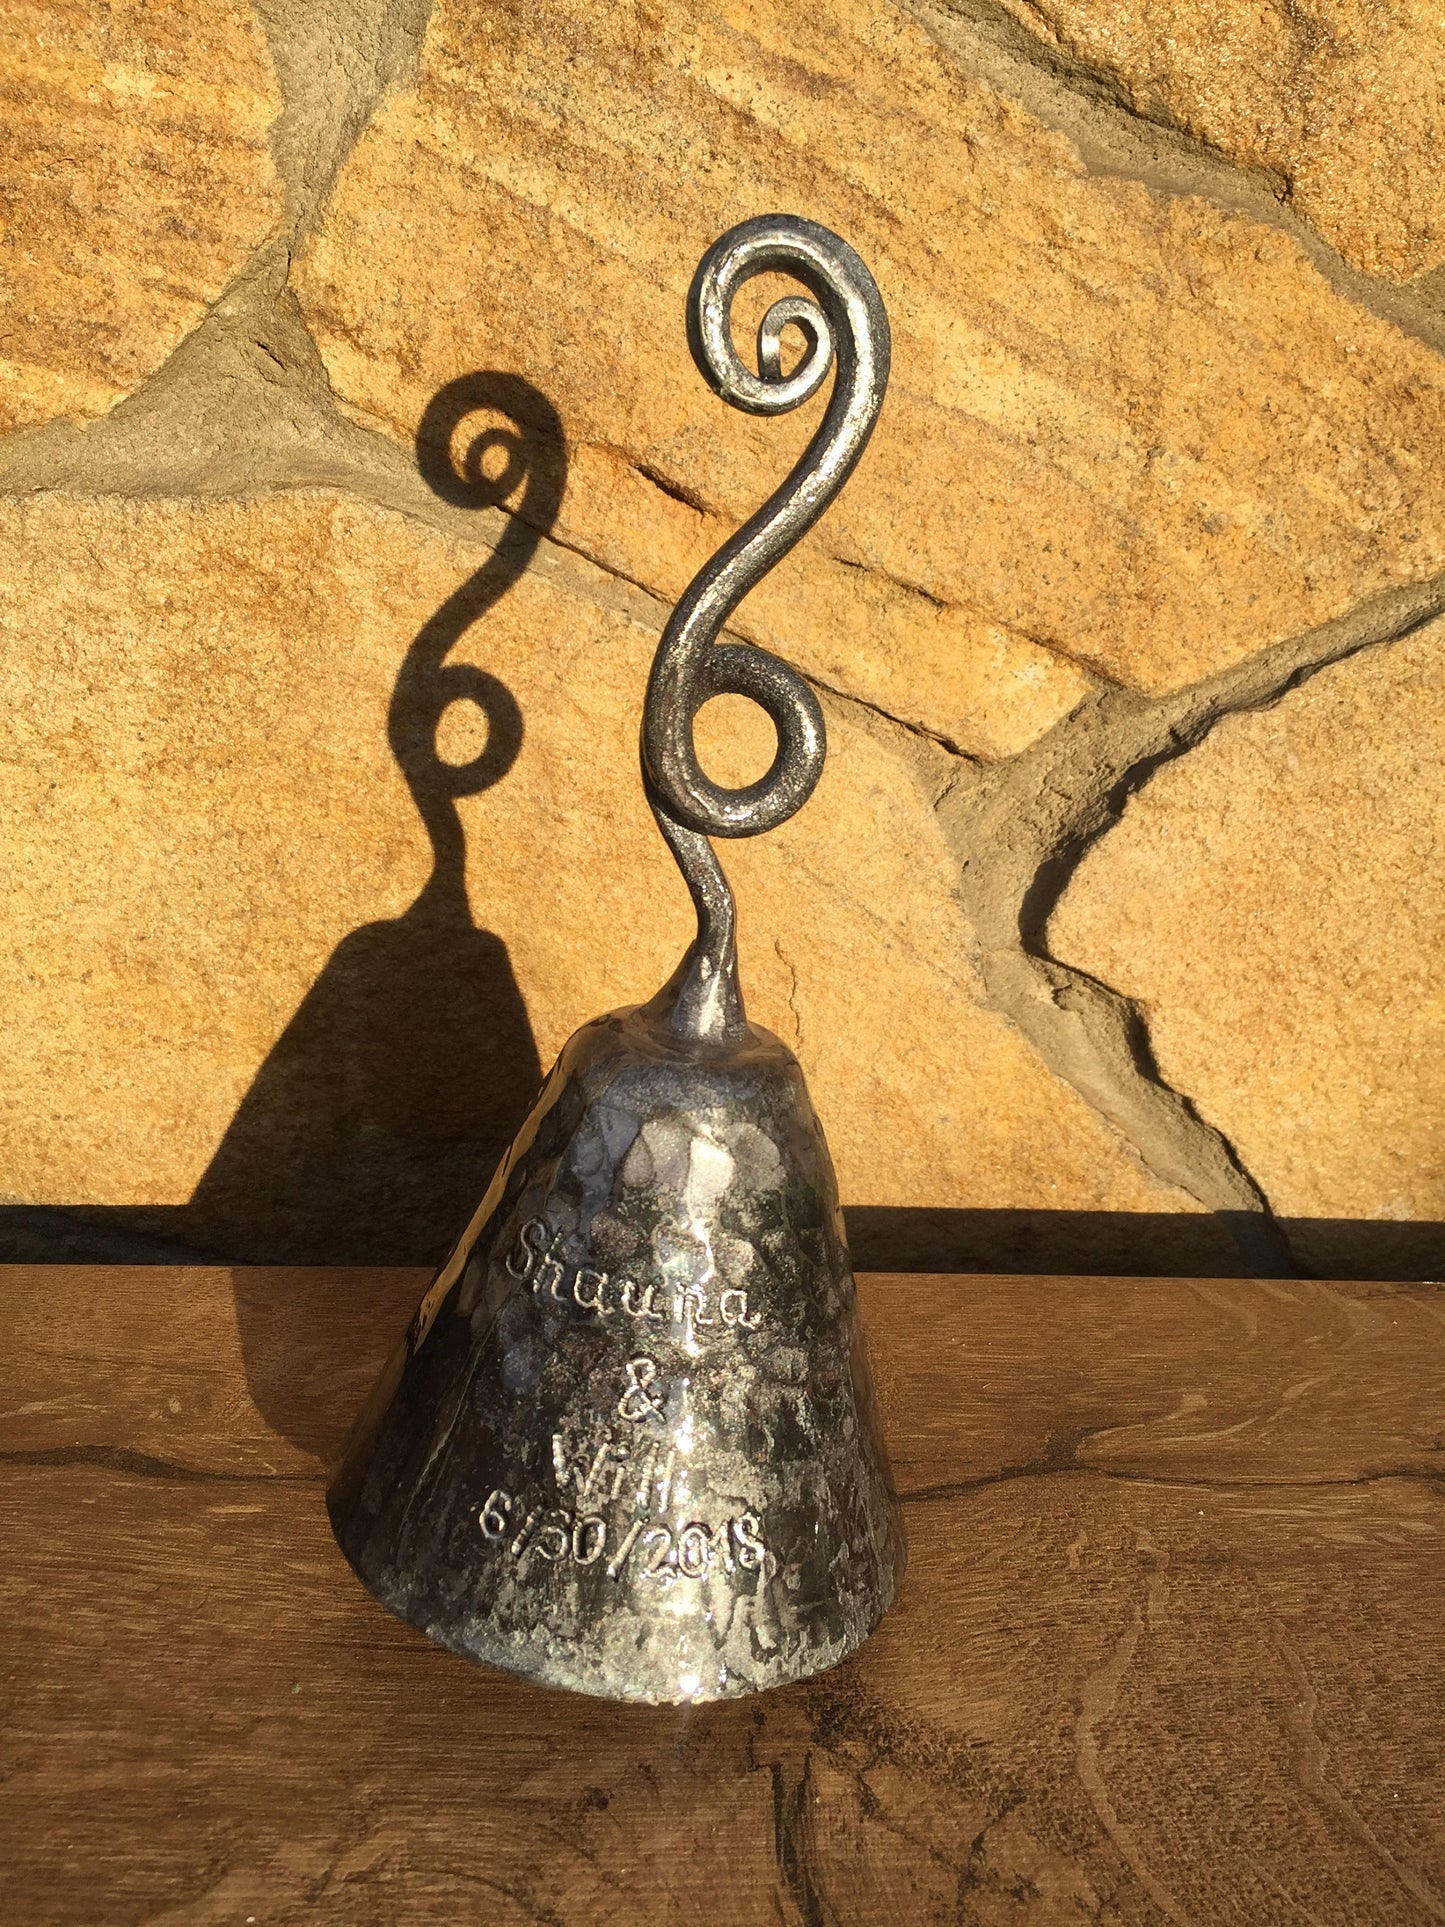 Engraved bell, hand made bells,wrought iron bell, metal bells,iron bells, metal art,metal gift, iron gift, birthday gift, metal sculpture